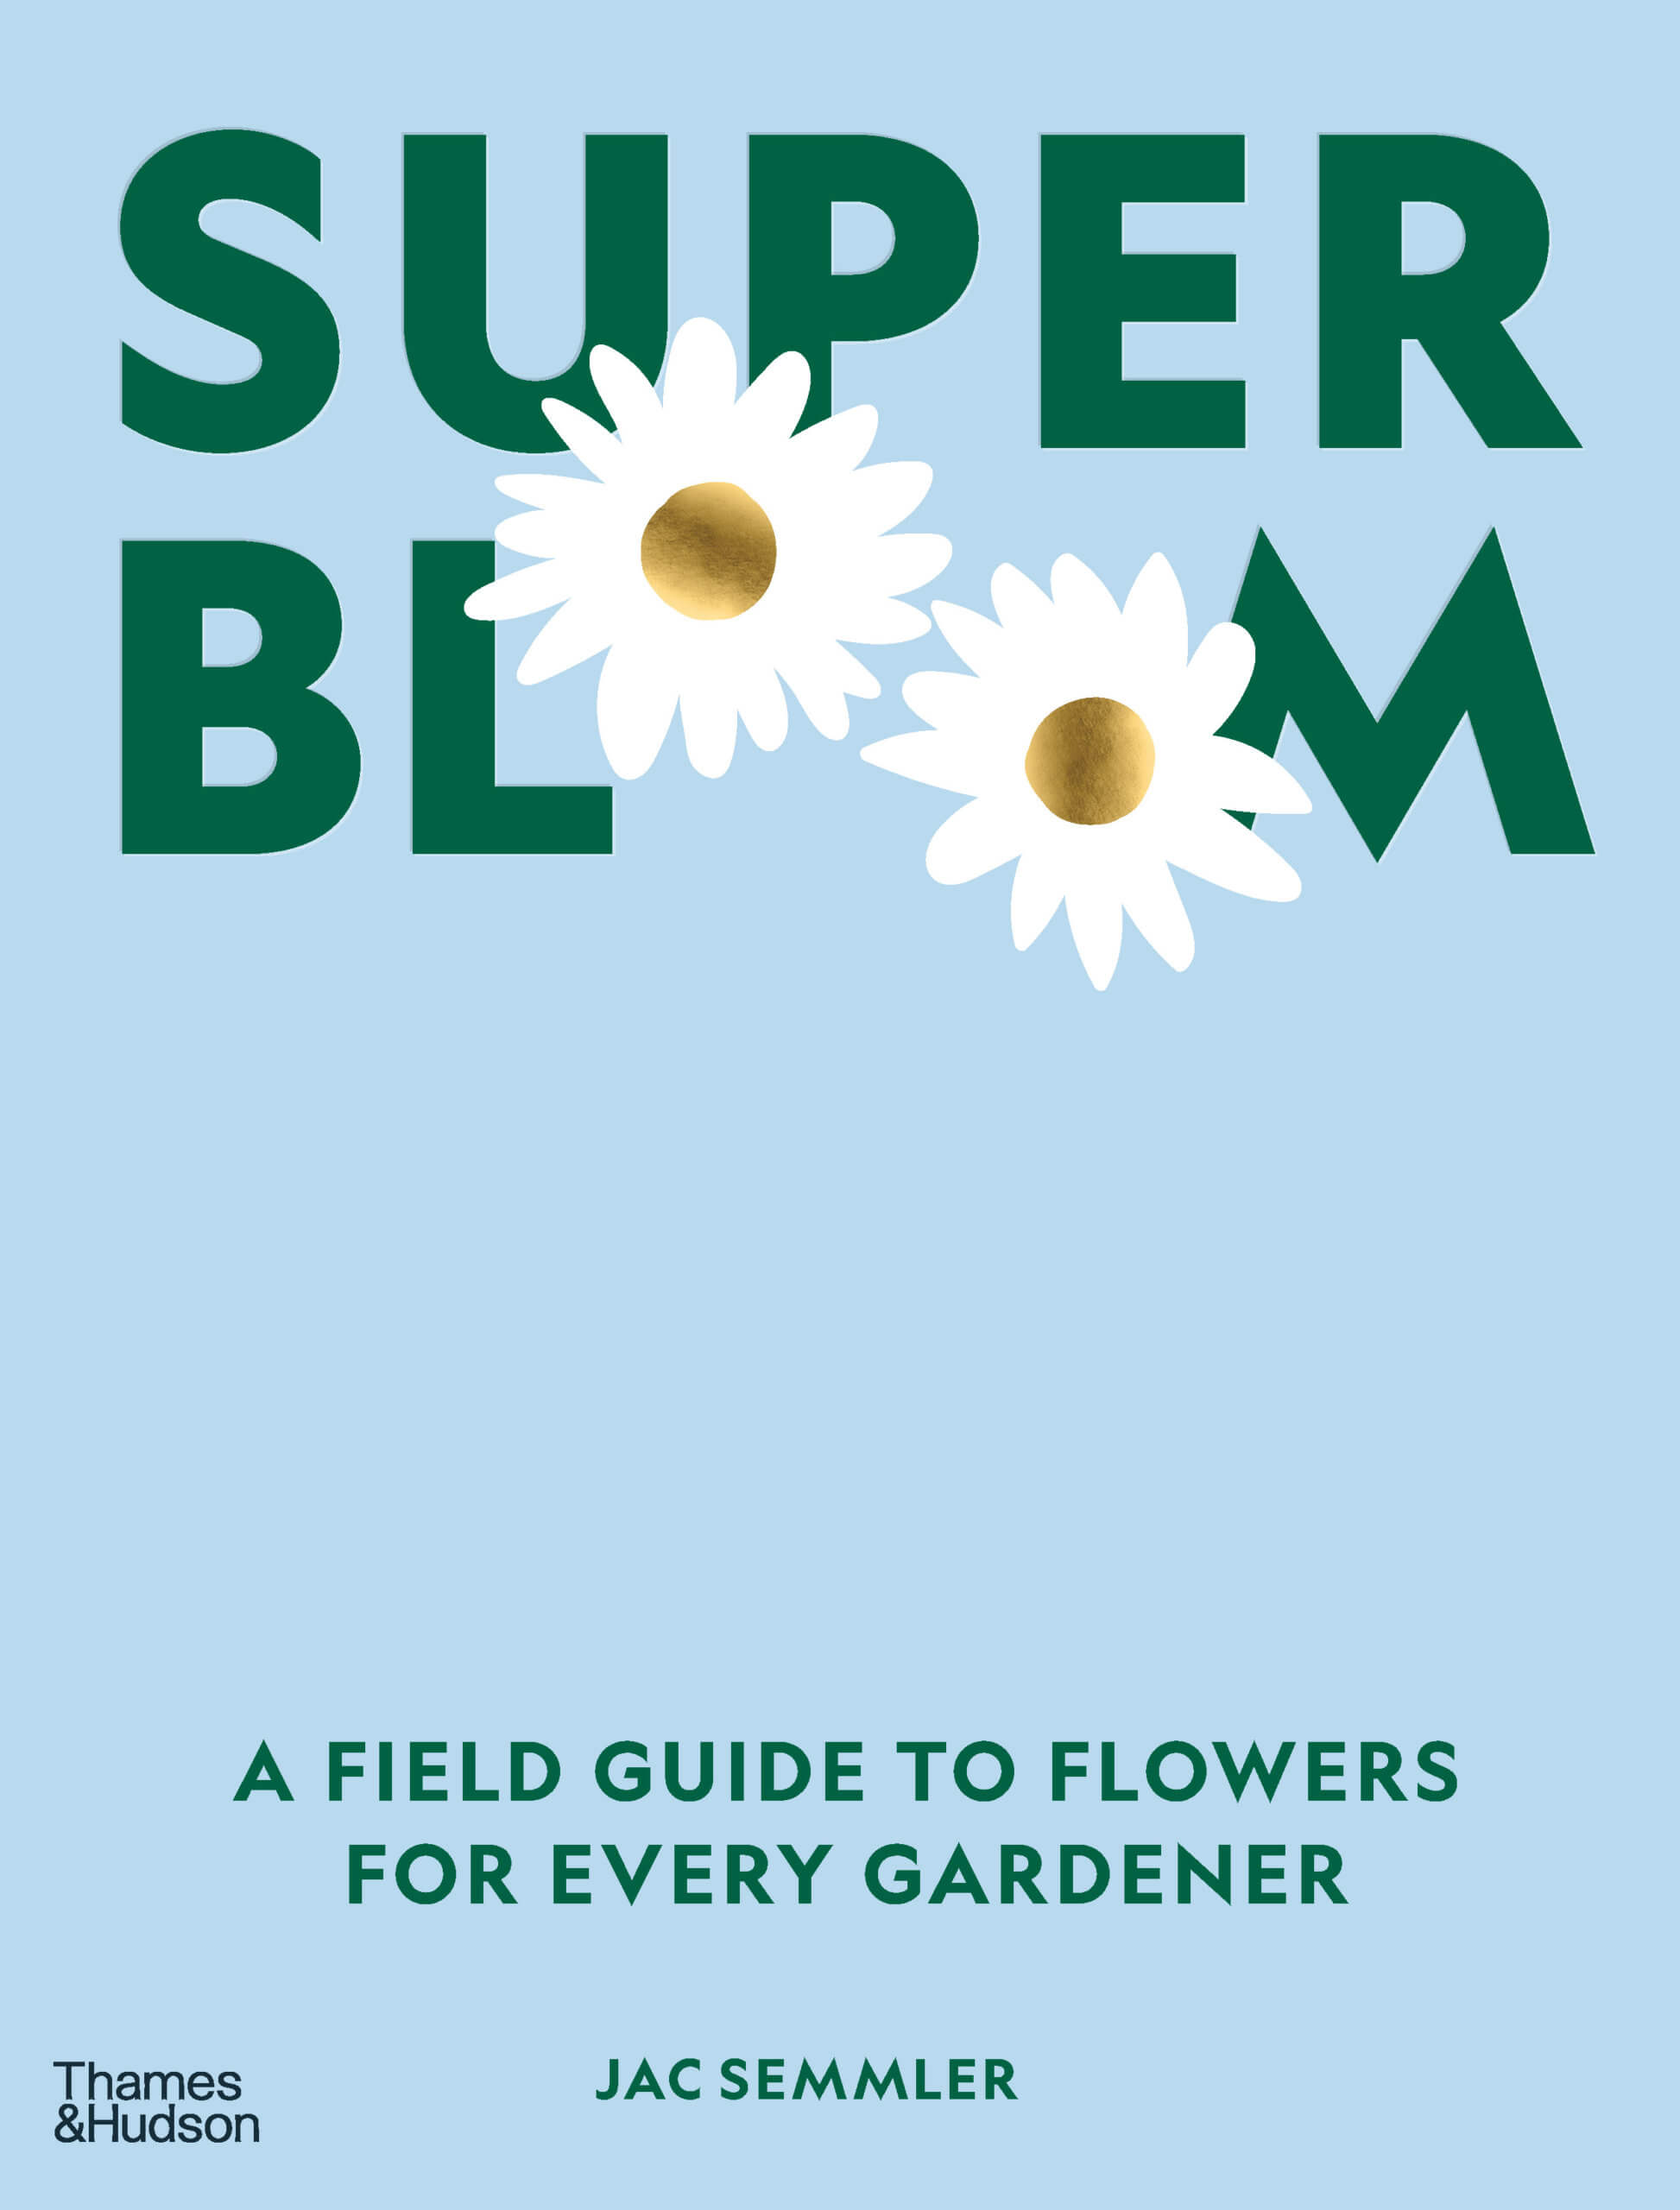 The words 'Super Bloom' in a sans serif typeface. The words are a dark green and have two white daisies representing the 'o's. The background is a cornflour blue. The subtitle is 'A field guide to flowers for every gardener.'